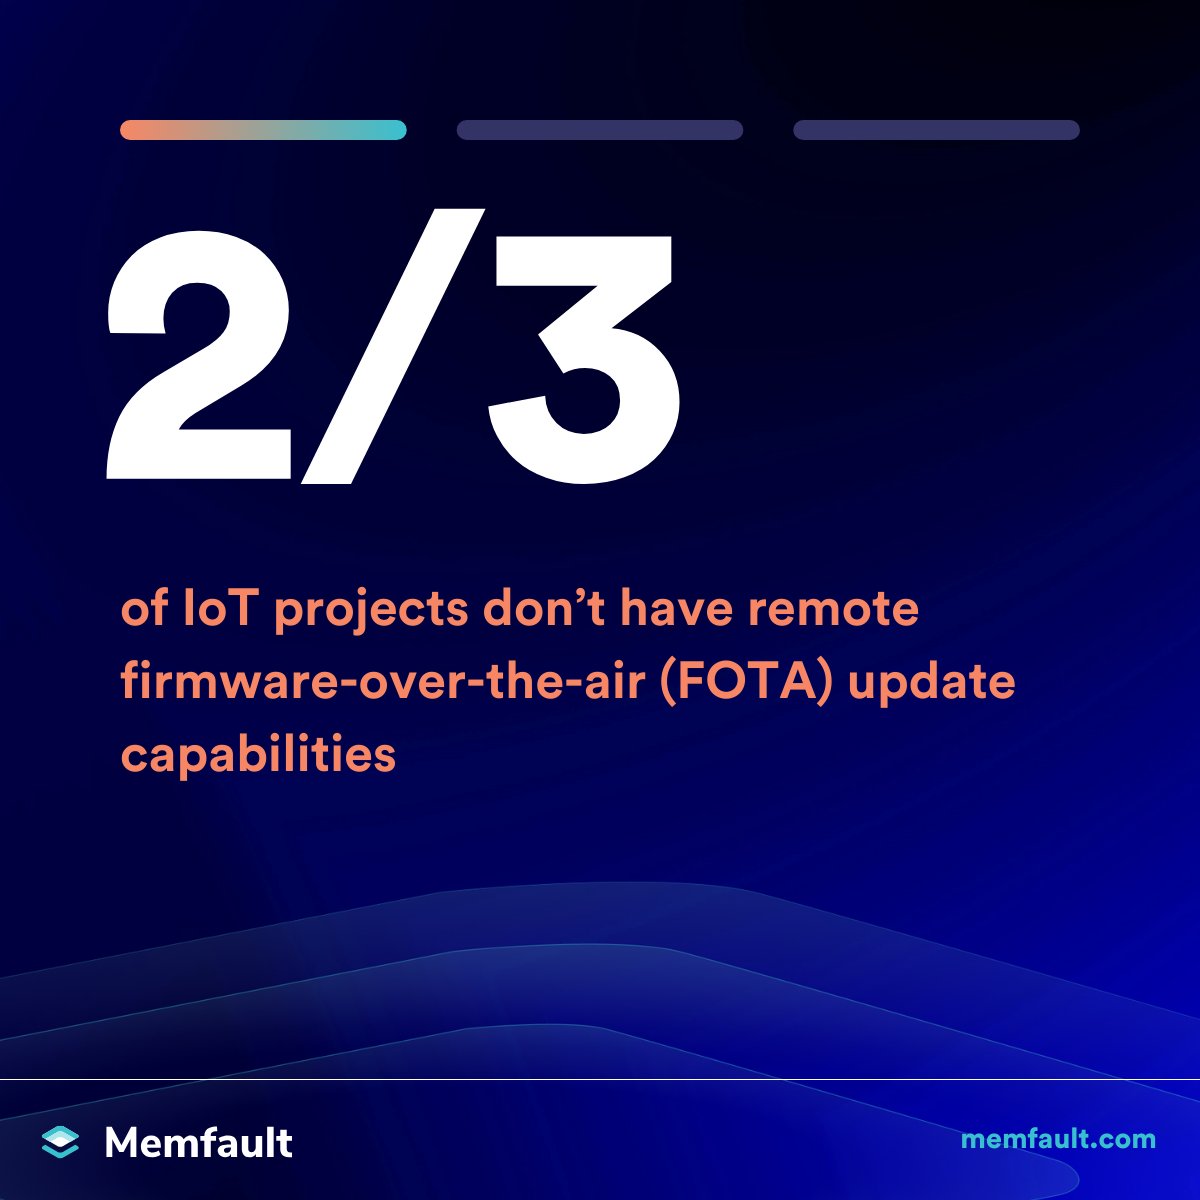 Why do so many IoT companies still fail to plan for the software updates their products will need? The 4 moments during IoT product development when you most need OTA: 1: Design. 2: Pre-launch. 3: Post-ship. 4: Product issues. Read more: hubs.la/Q02xPw2C0